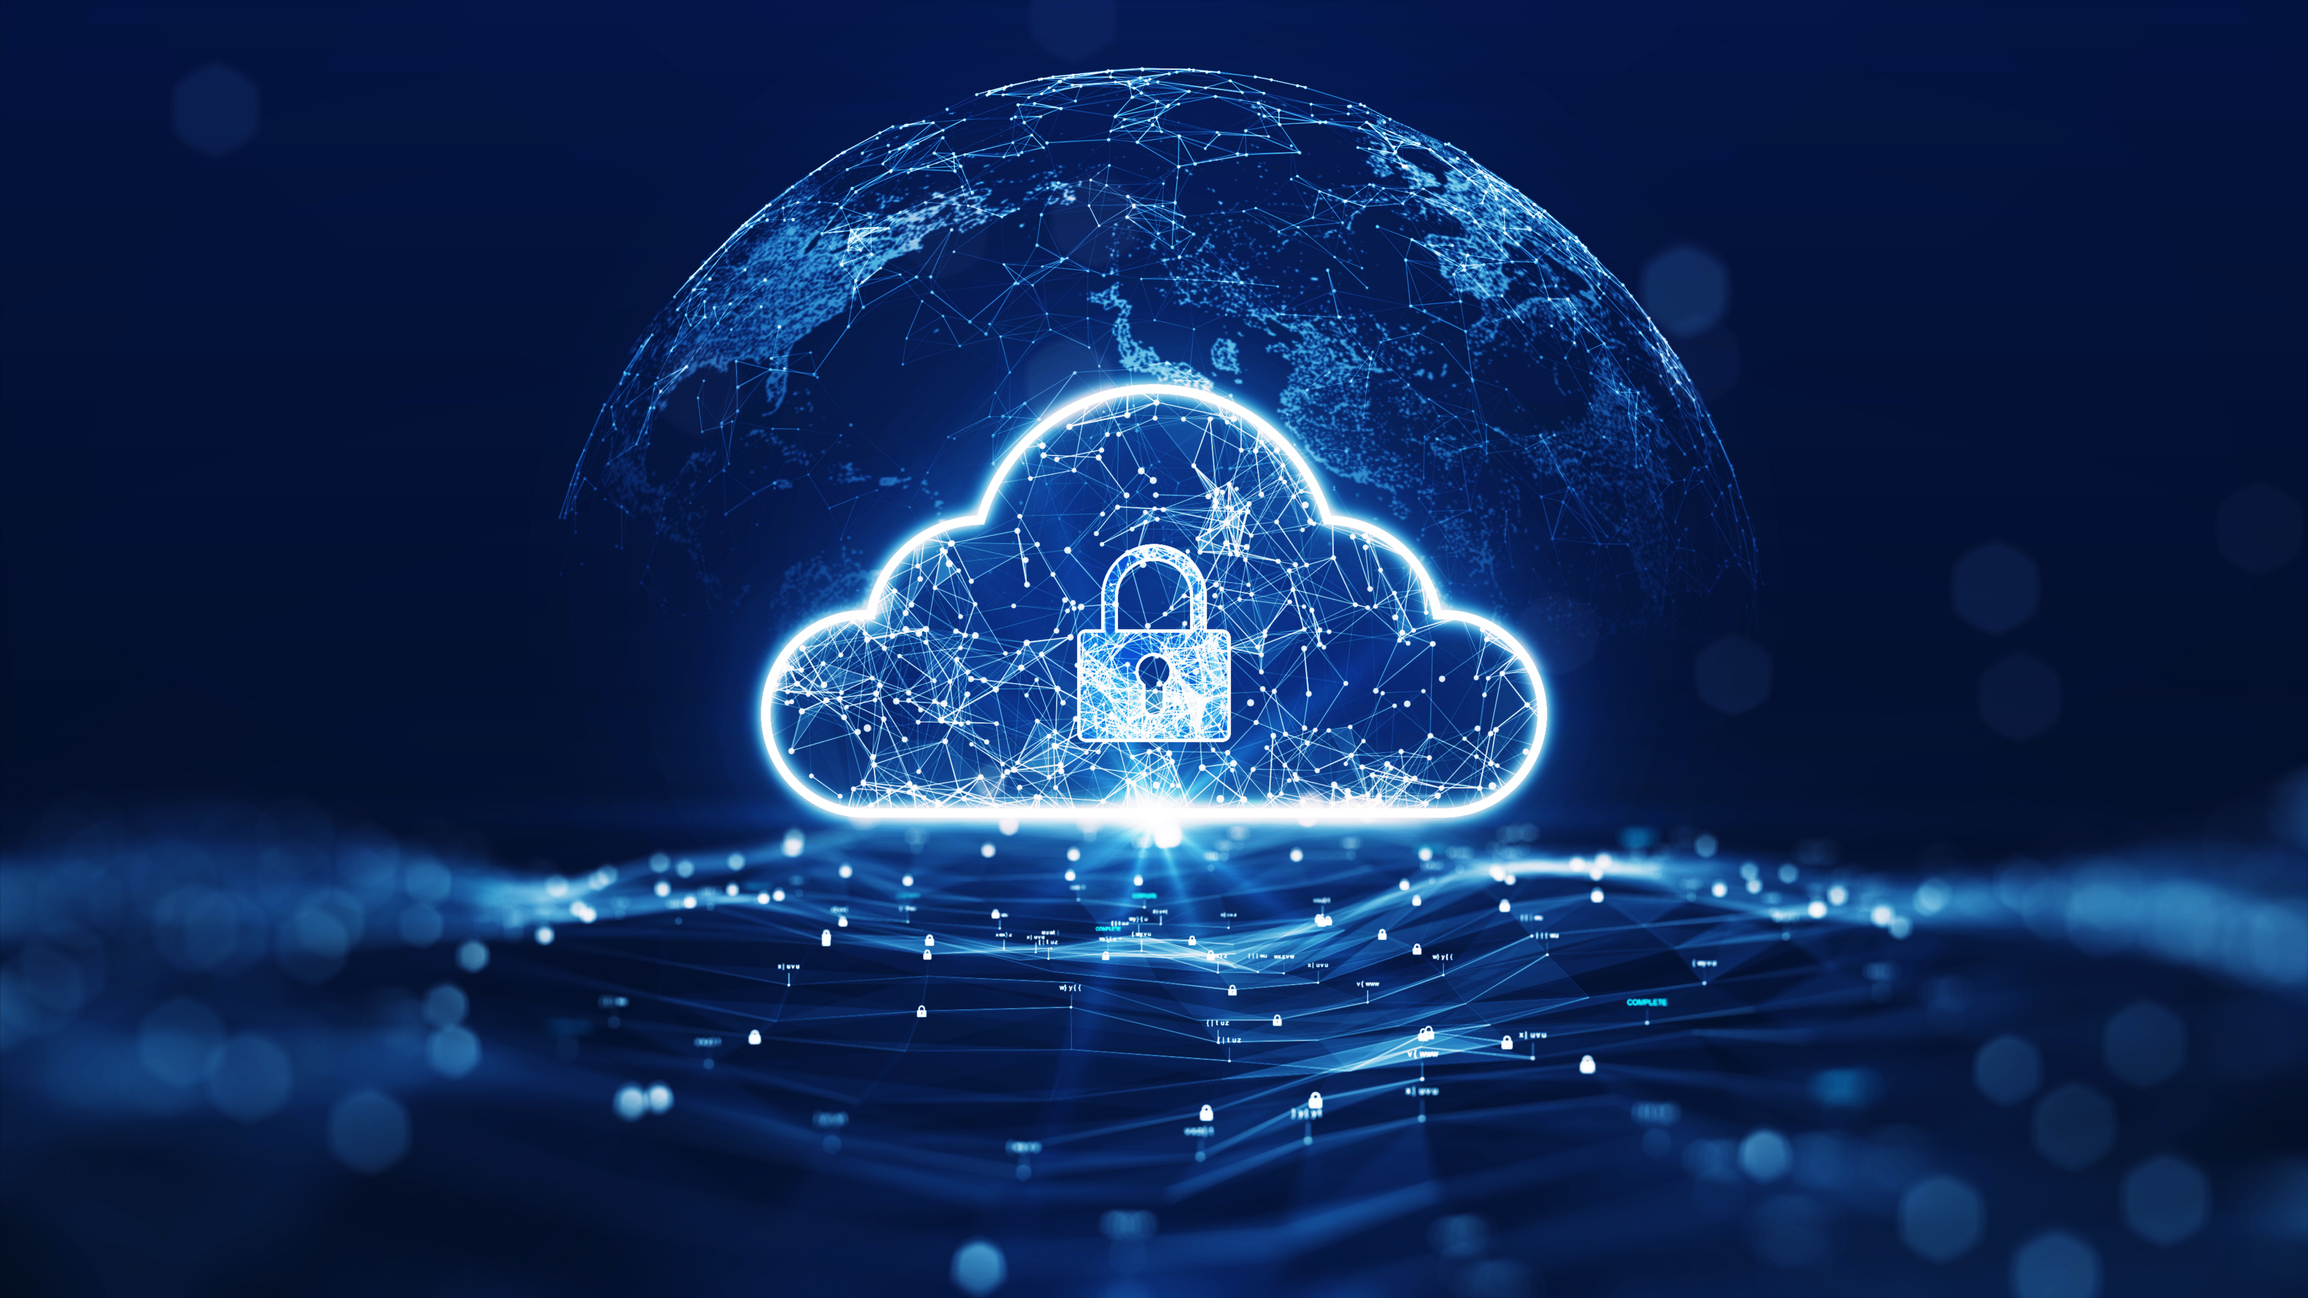 Cybersecurity depicted by cloud and safelock